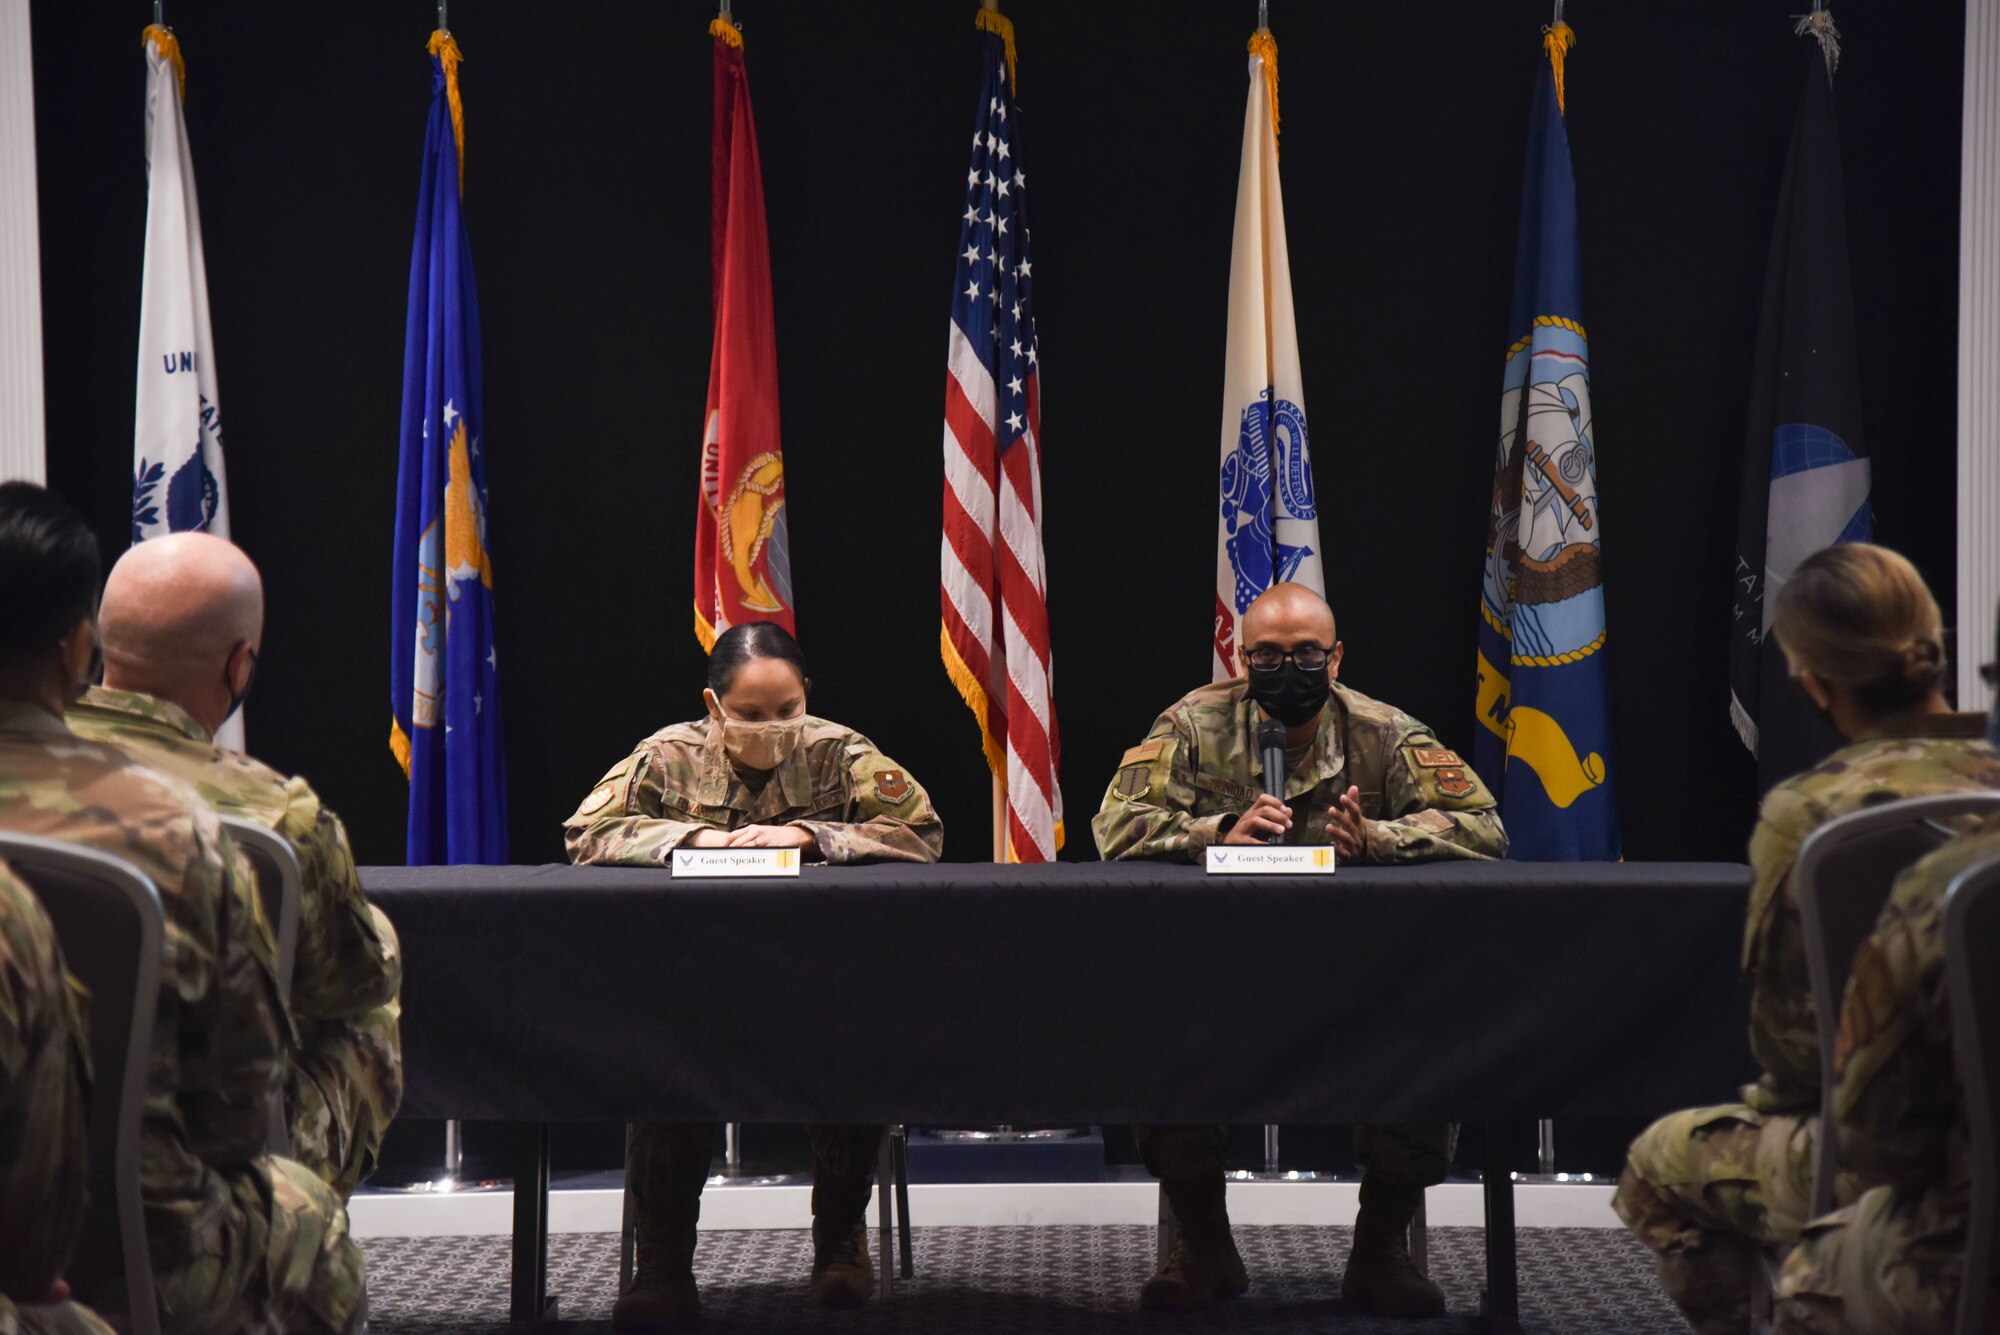 Service members hold a Q&A panel